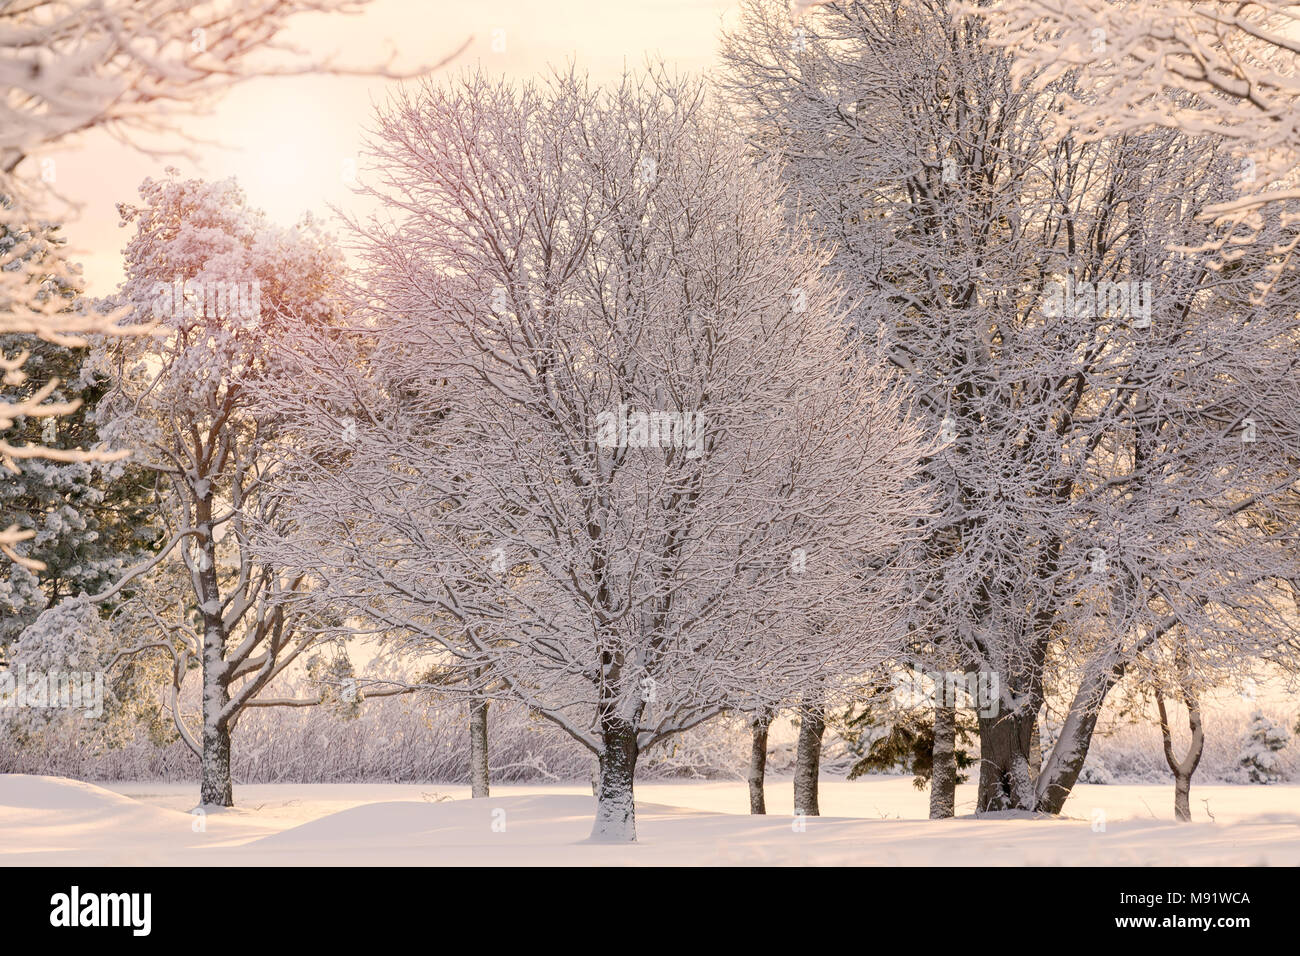 Snow covered trees in the winter landscape. Stock Photo